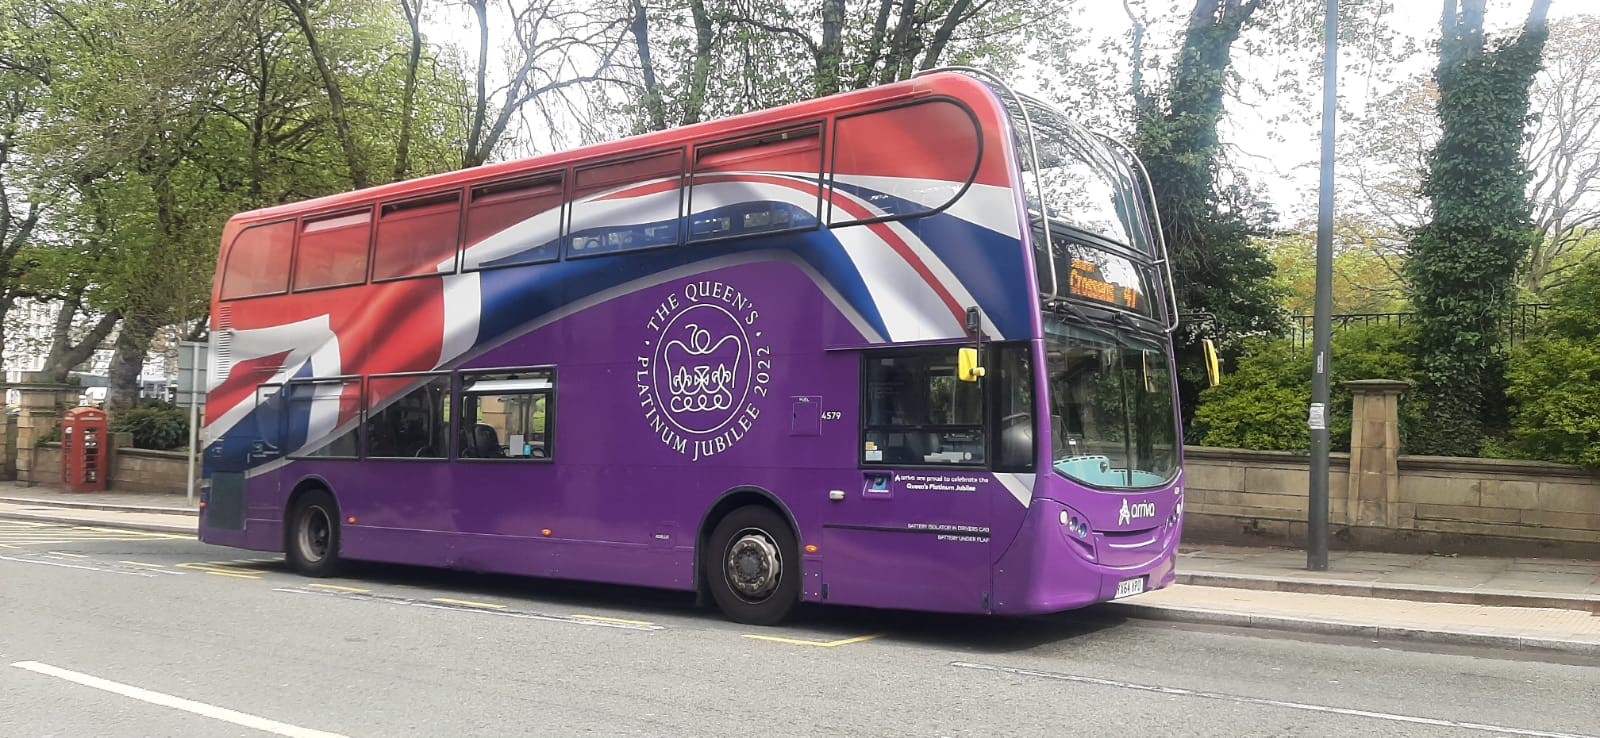 Arriva rolls out special Platinum Jubilee liveries